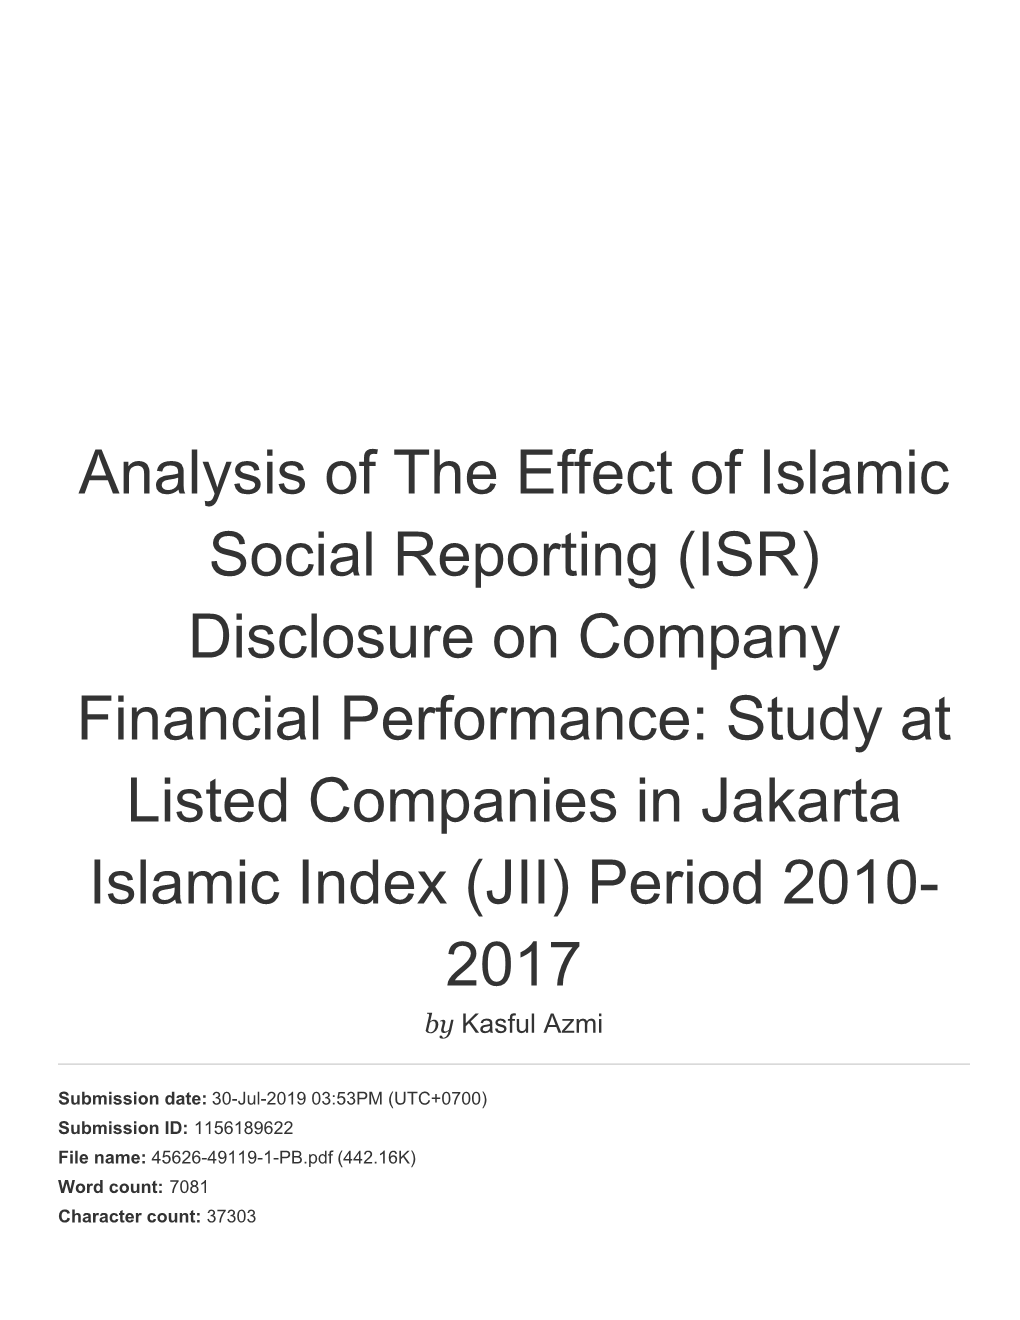 Analysis of the Effect of Islamic Social Reporting (ISR